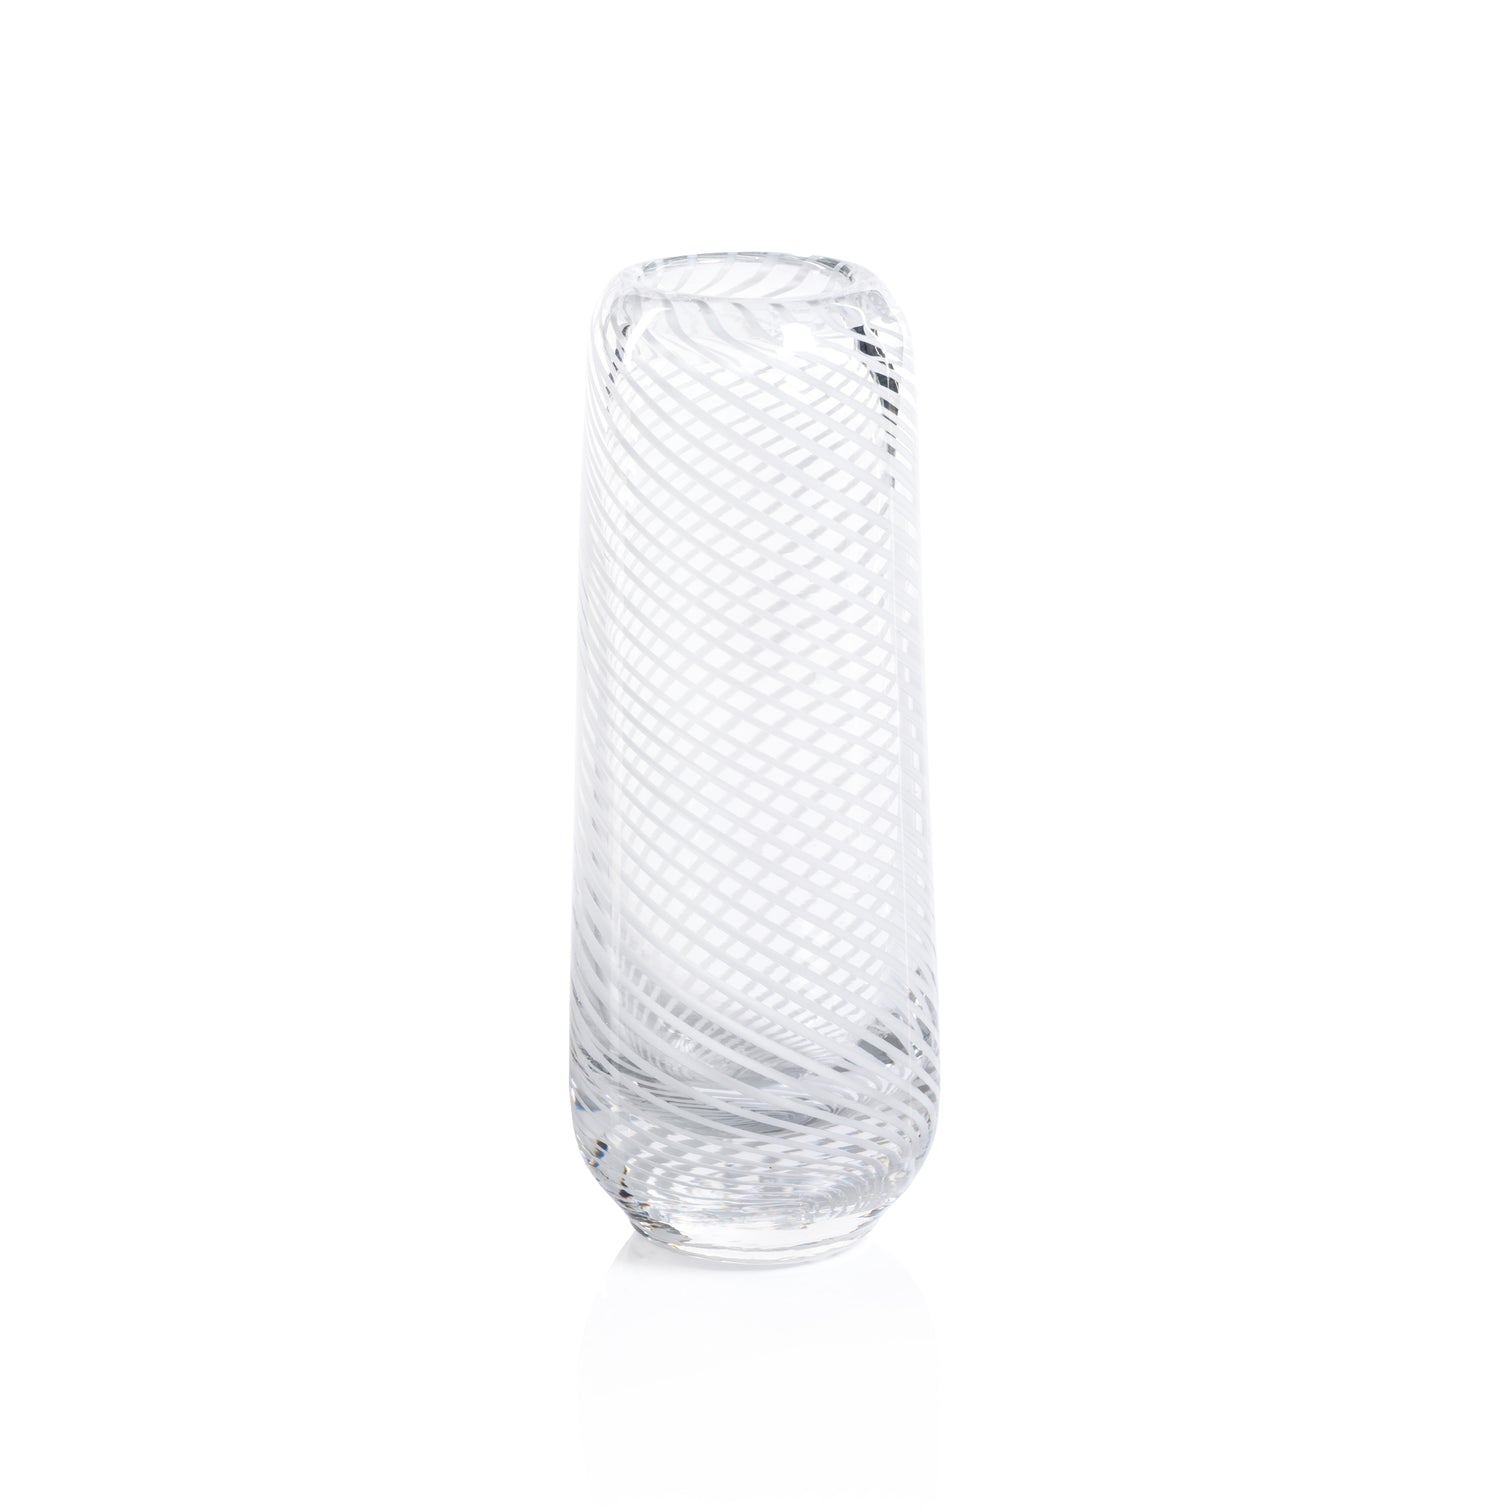 Claire Clear Bud Vases with White Swirl